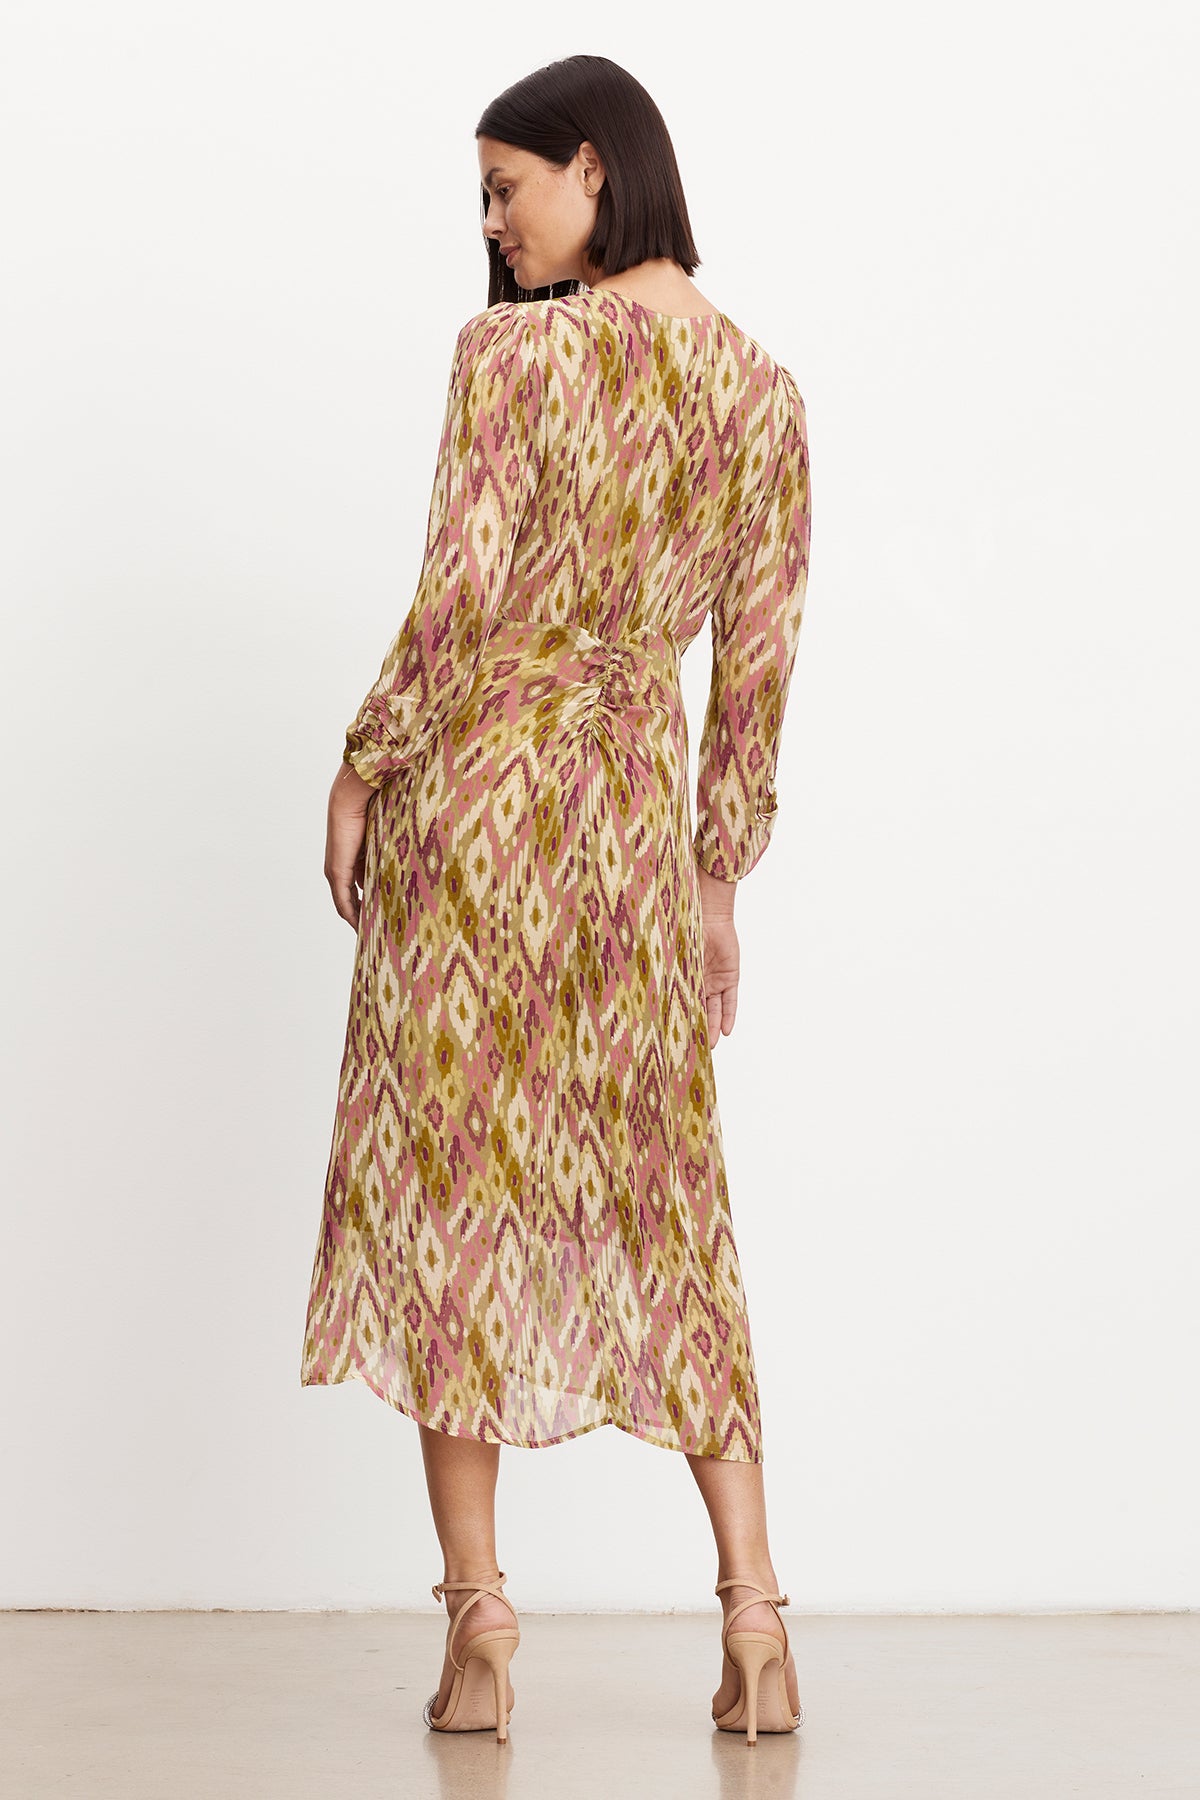 Woman standing facing away, wearing a long sleeve, mid-length CAILEY PRINTED RUCHED DRESS in viscose georgette with a pink and green bohemian print, teamed with light pink heels by Velvet by Graham & Spencer.-35577738363073